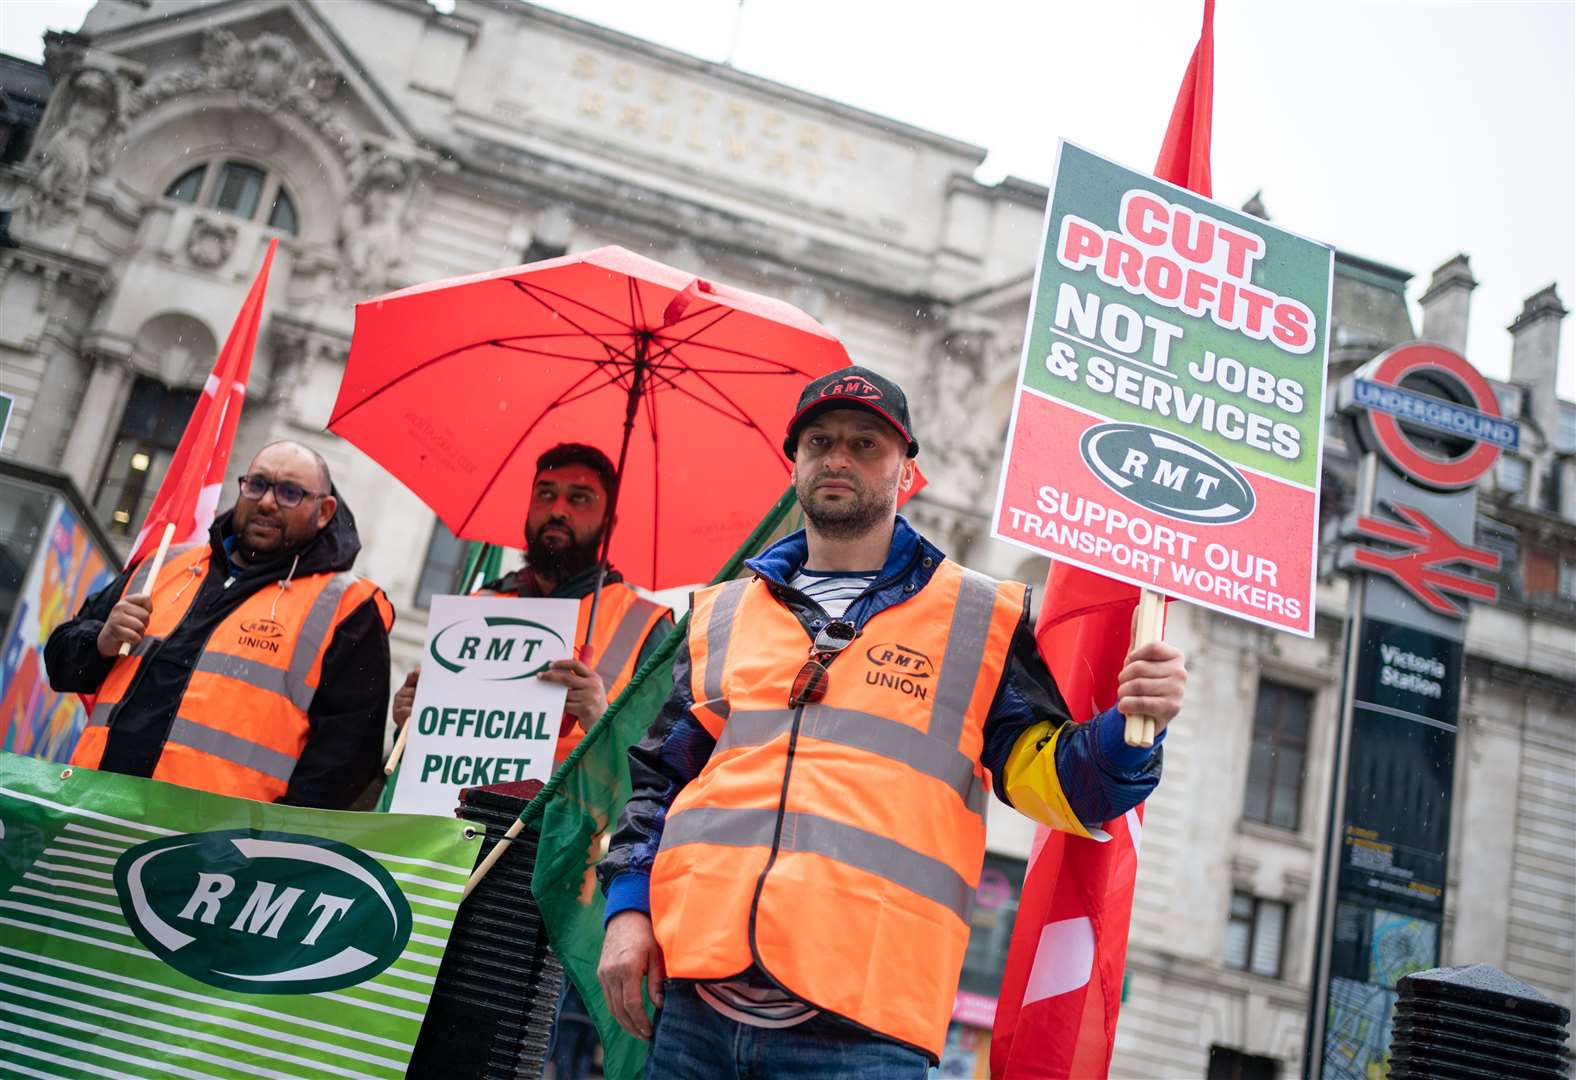 Members of the RMT union on a picket line outside Victoria station in London (Dominic Lipinski/PA)